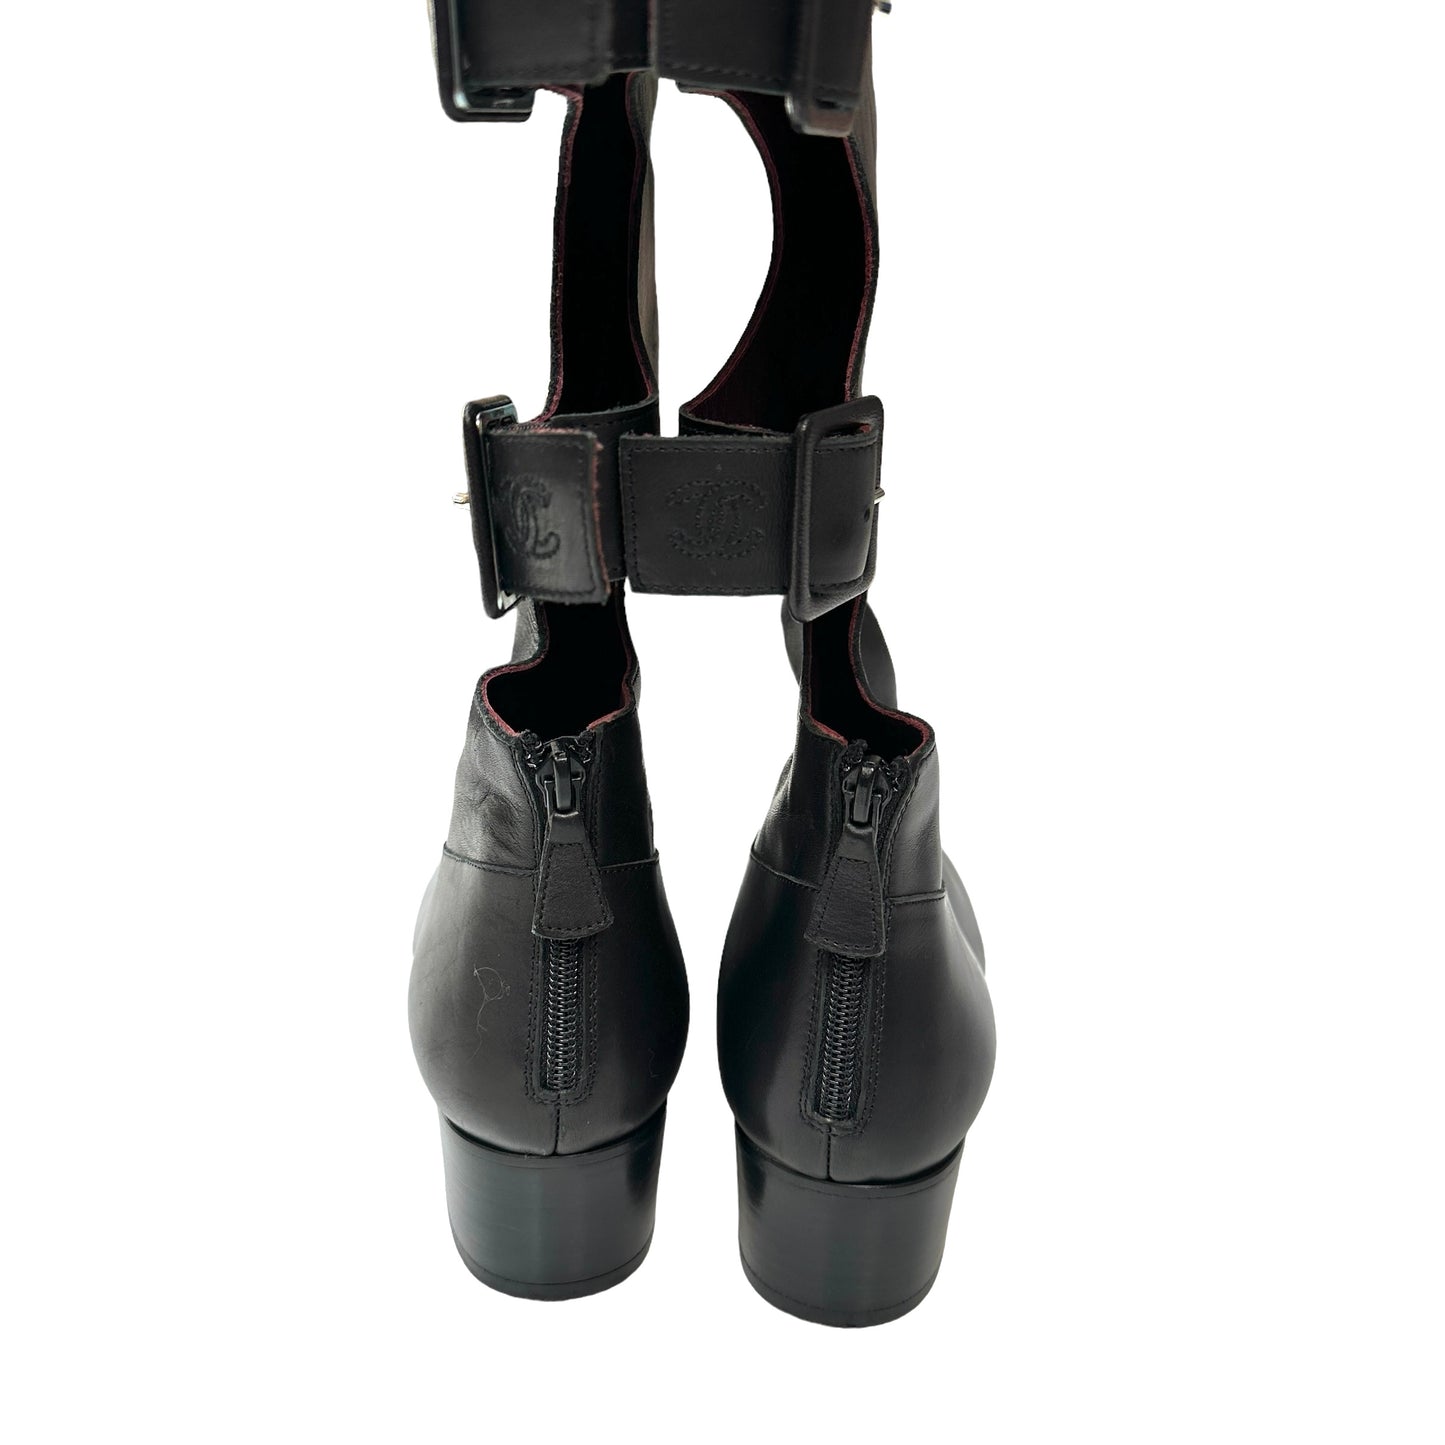 Black Tall Buckles Boots - 10